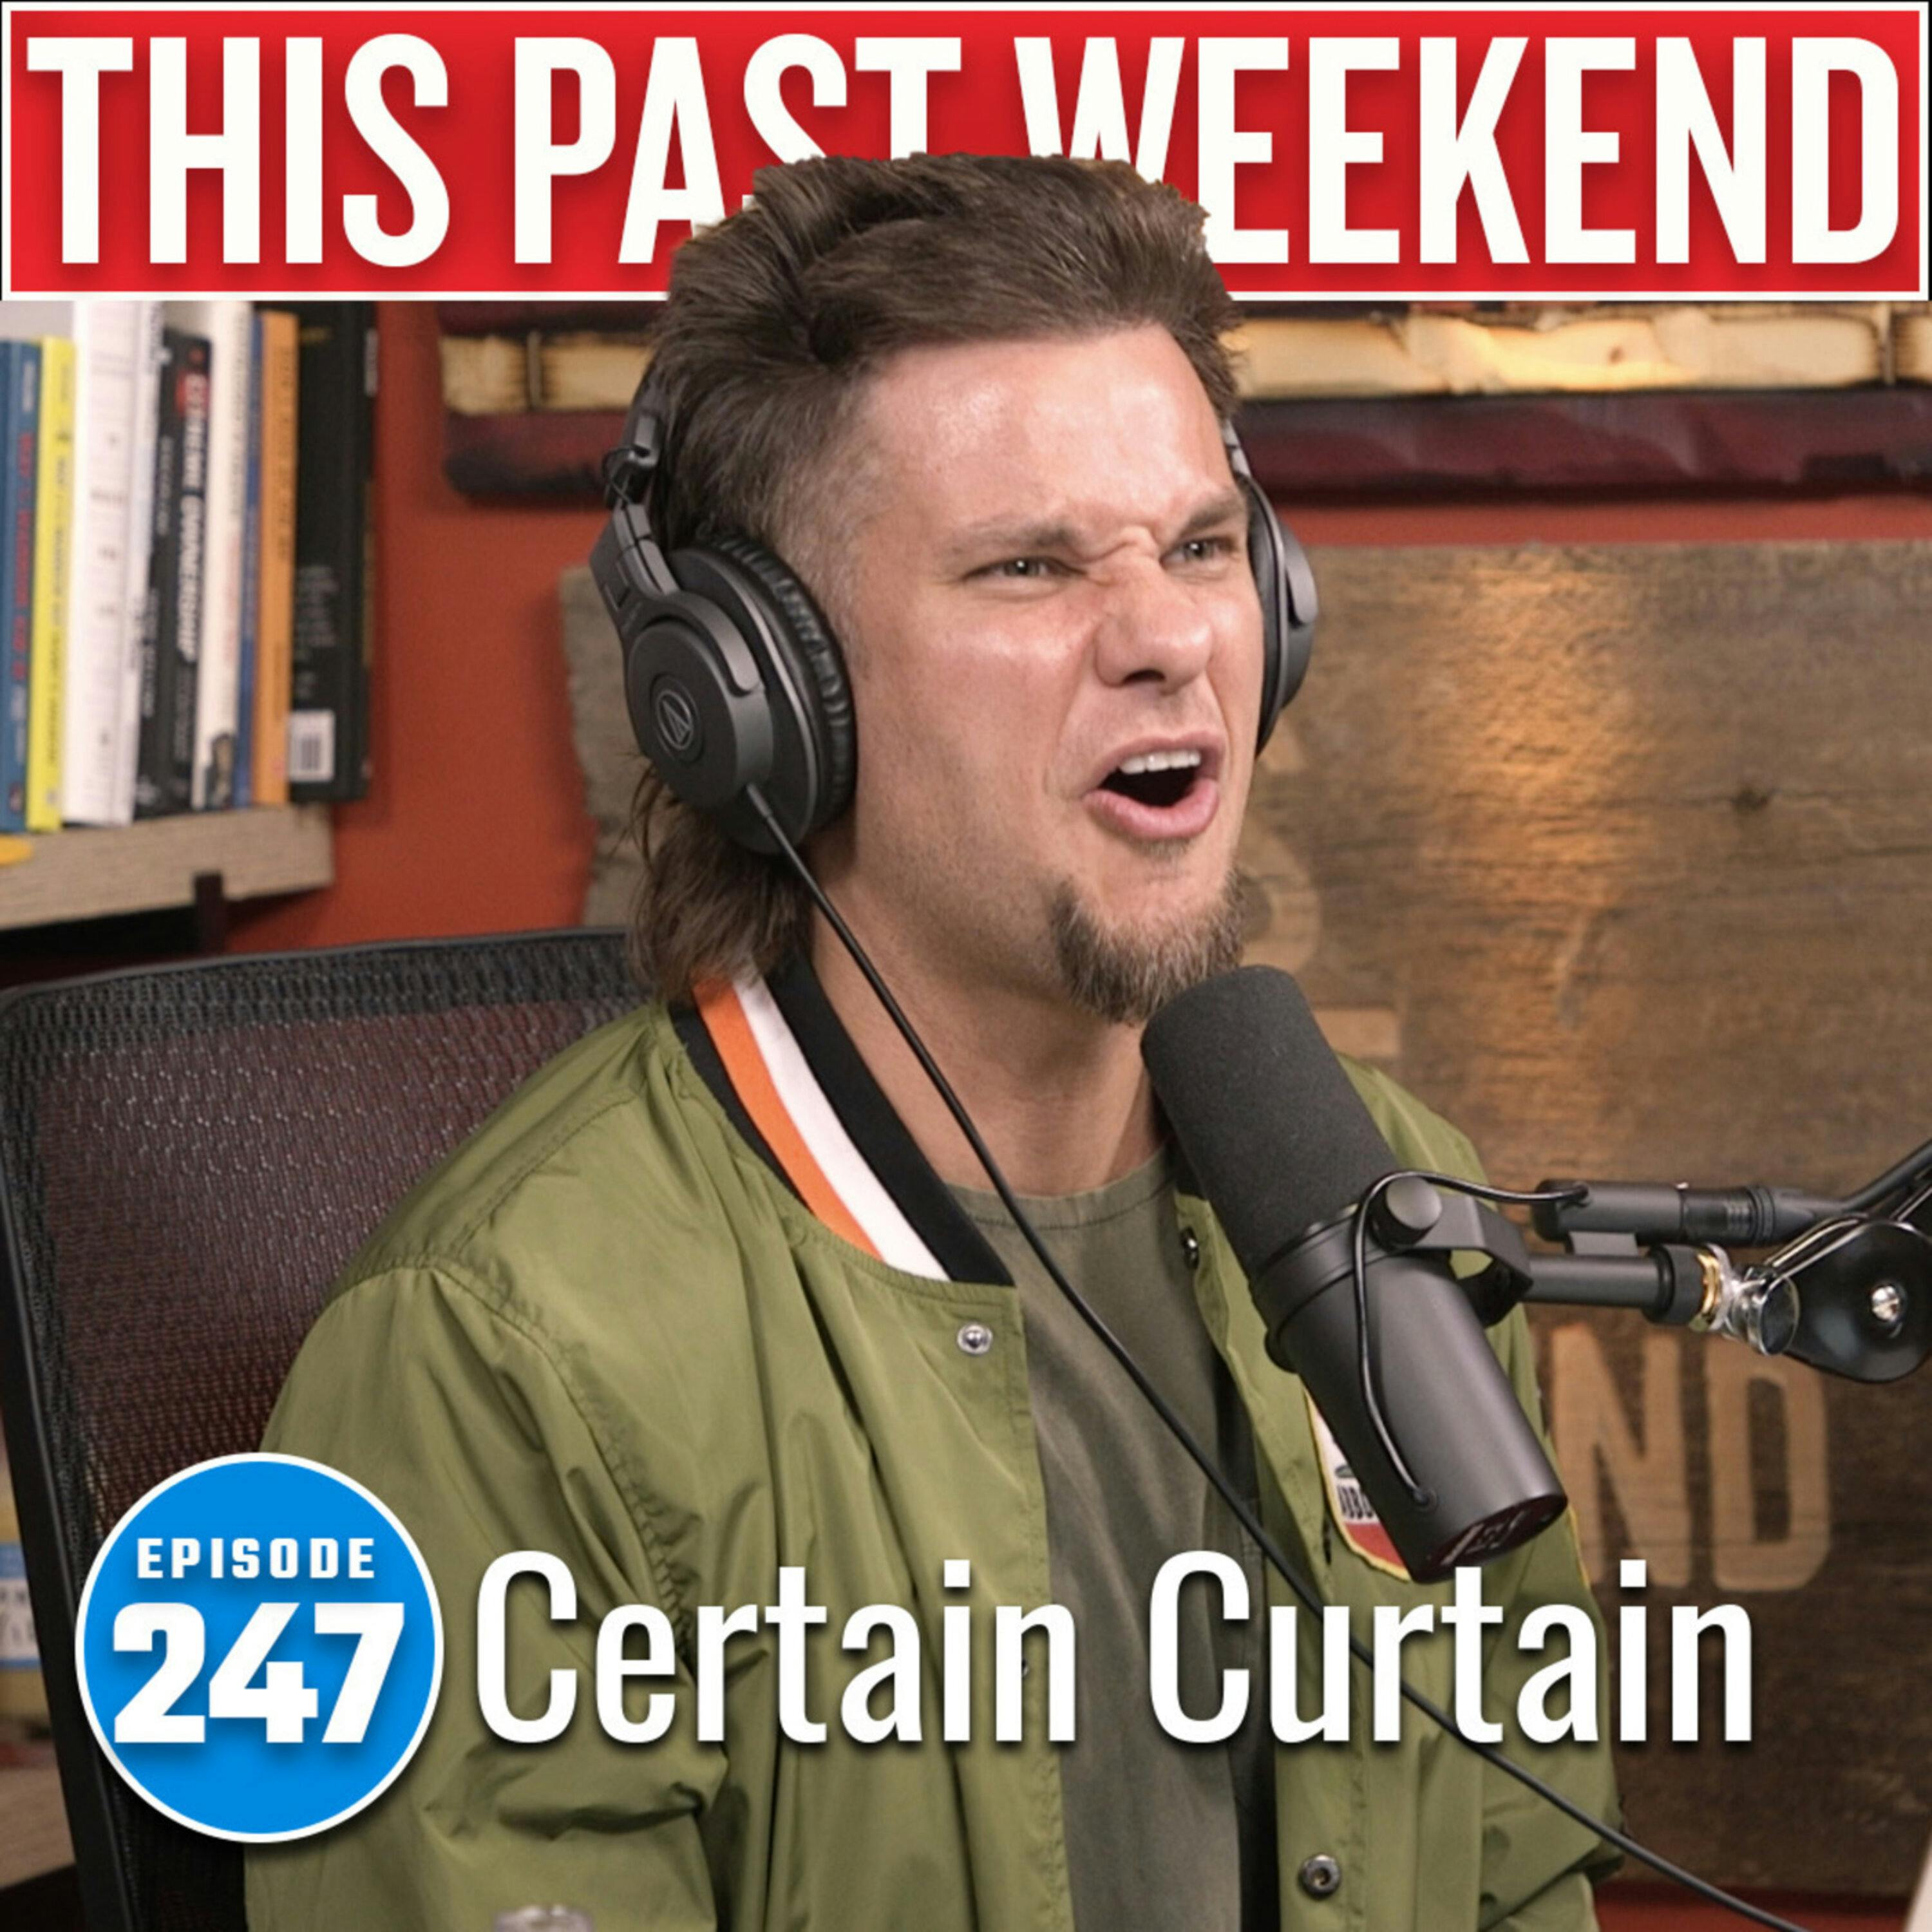 Certain Curtain | This Past Weekend #247